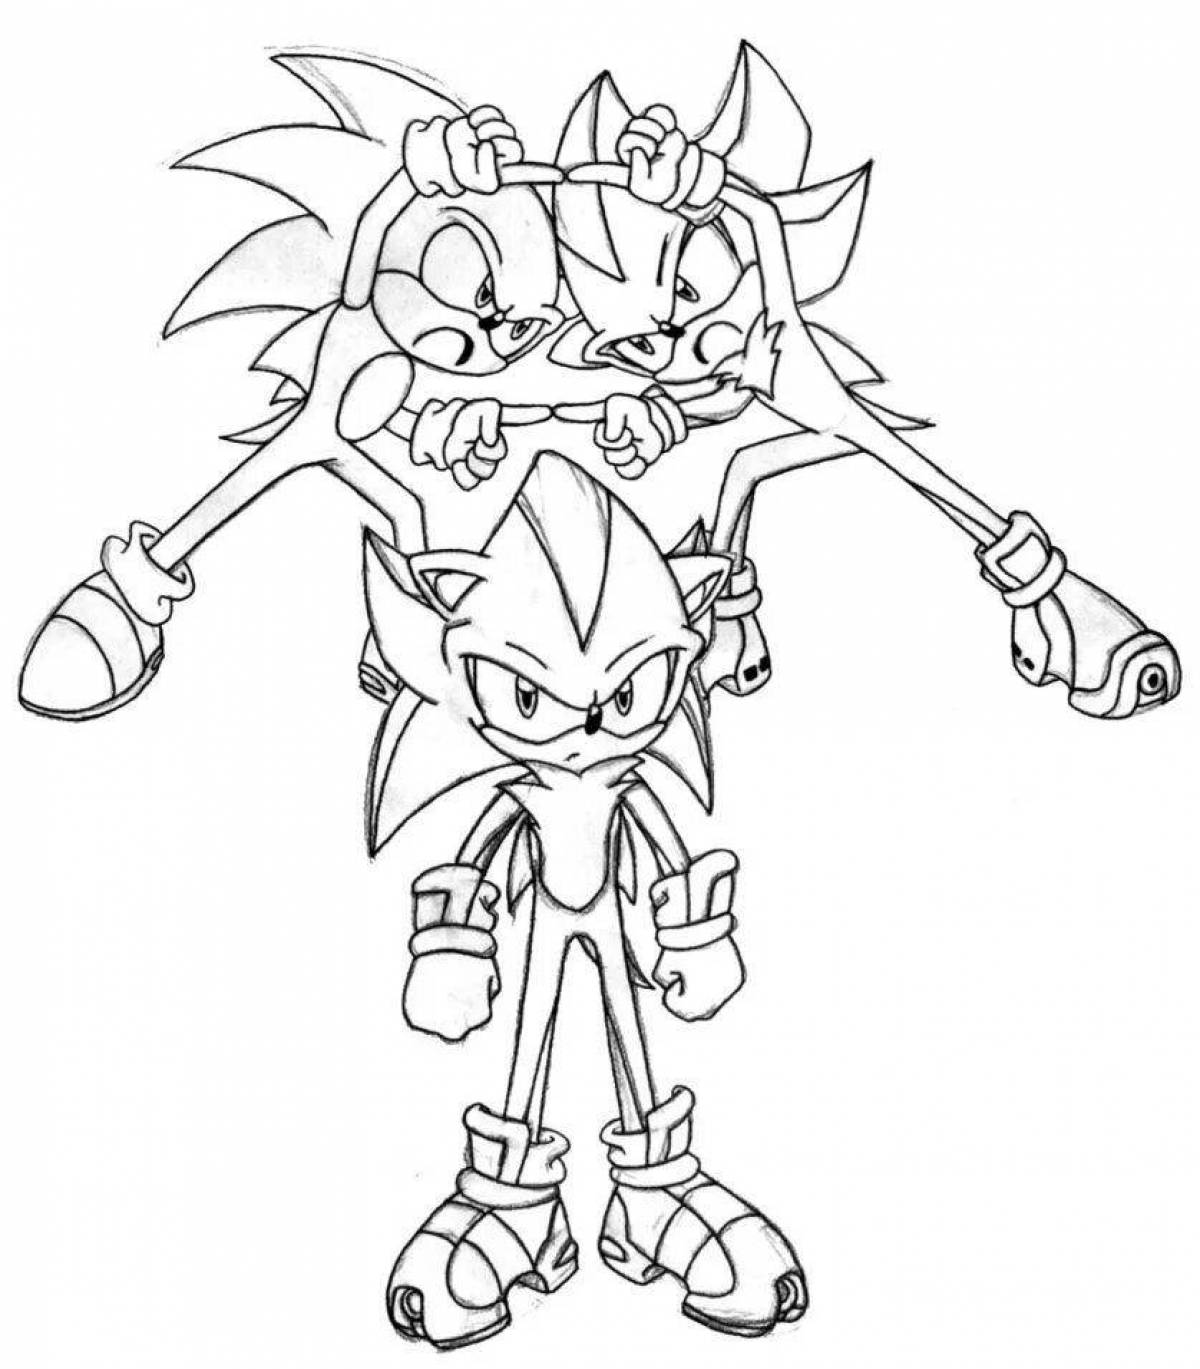 Amazing darkspine sonic coloring page